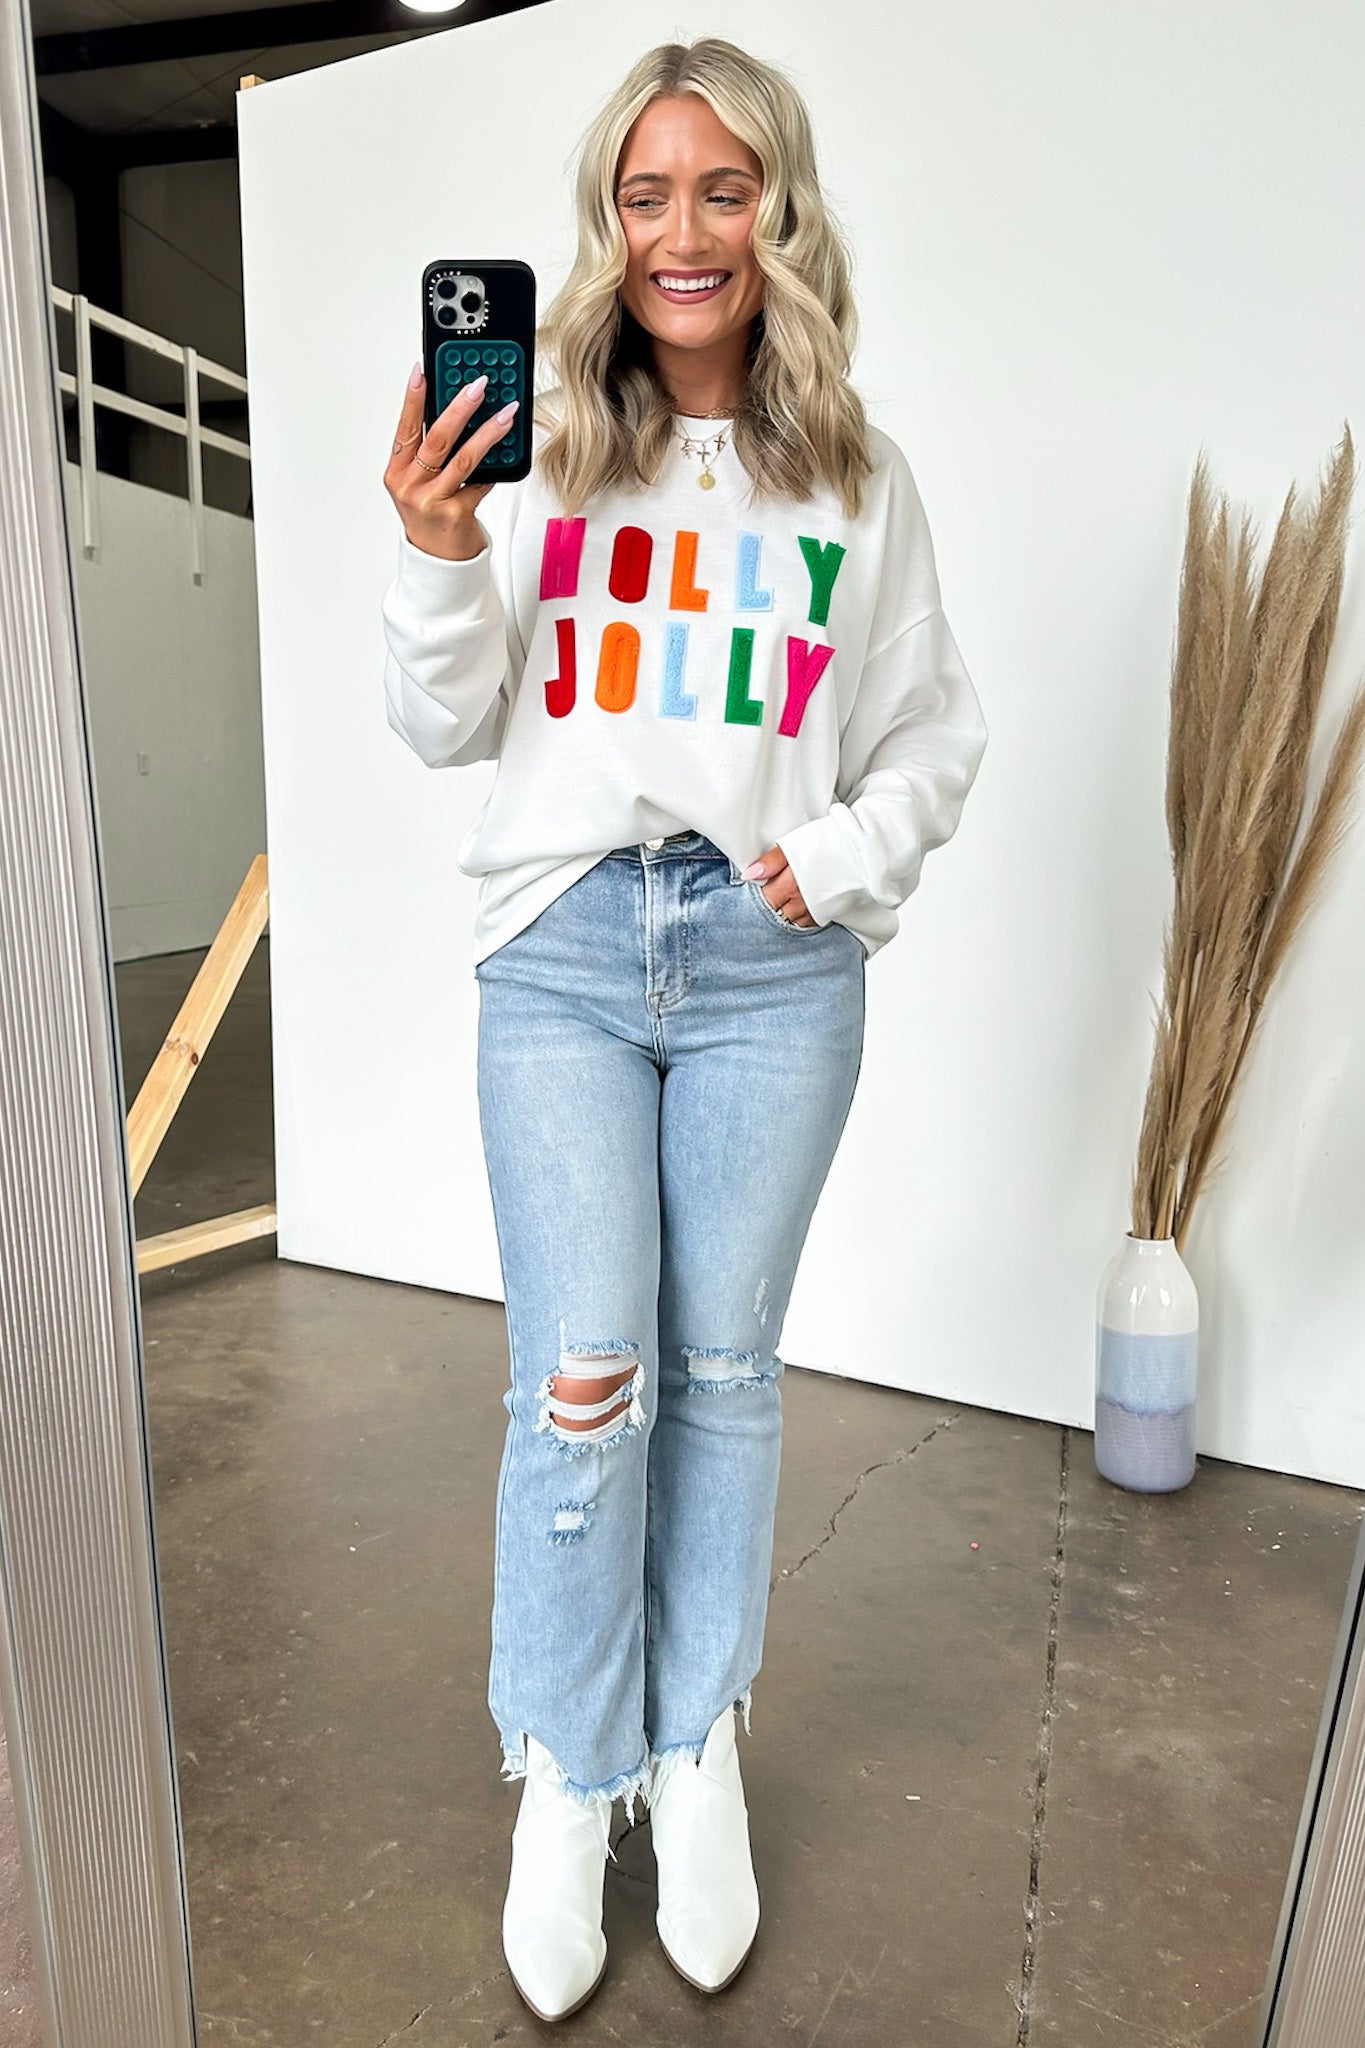  Holly Jolly French Terry Oversized Pullover - FINAL SALE - Madison and Mallory